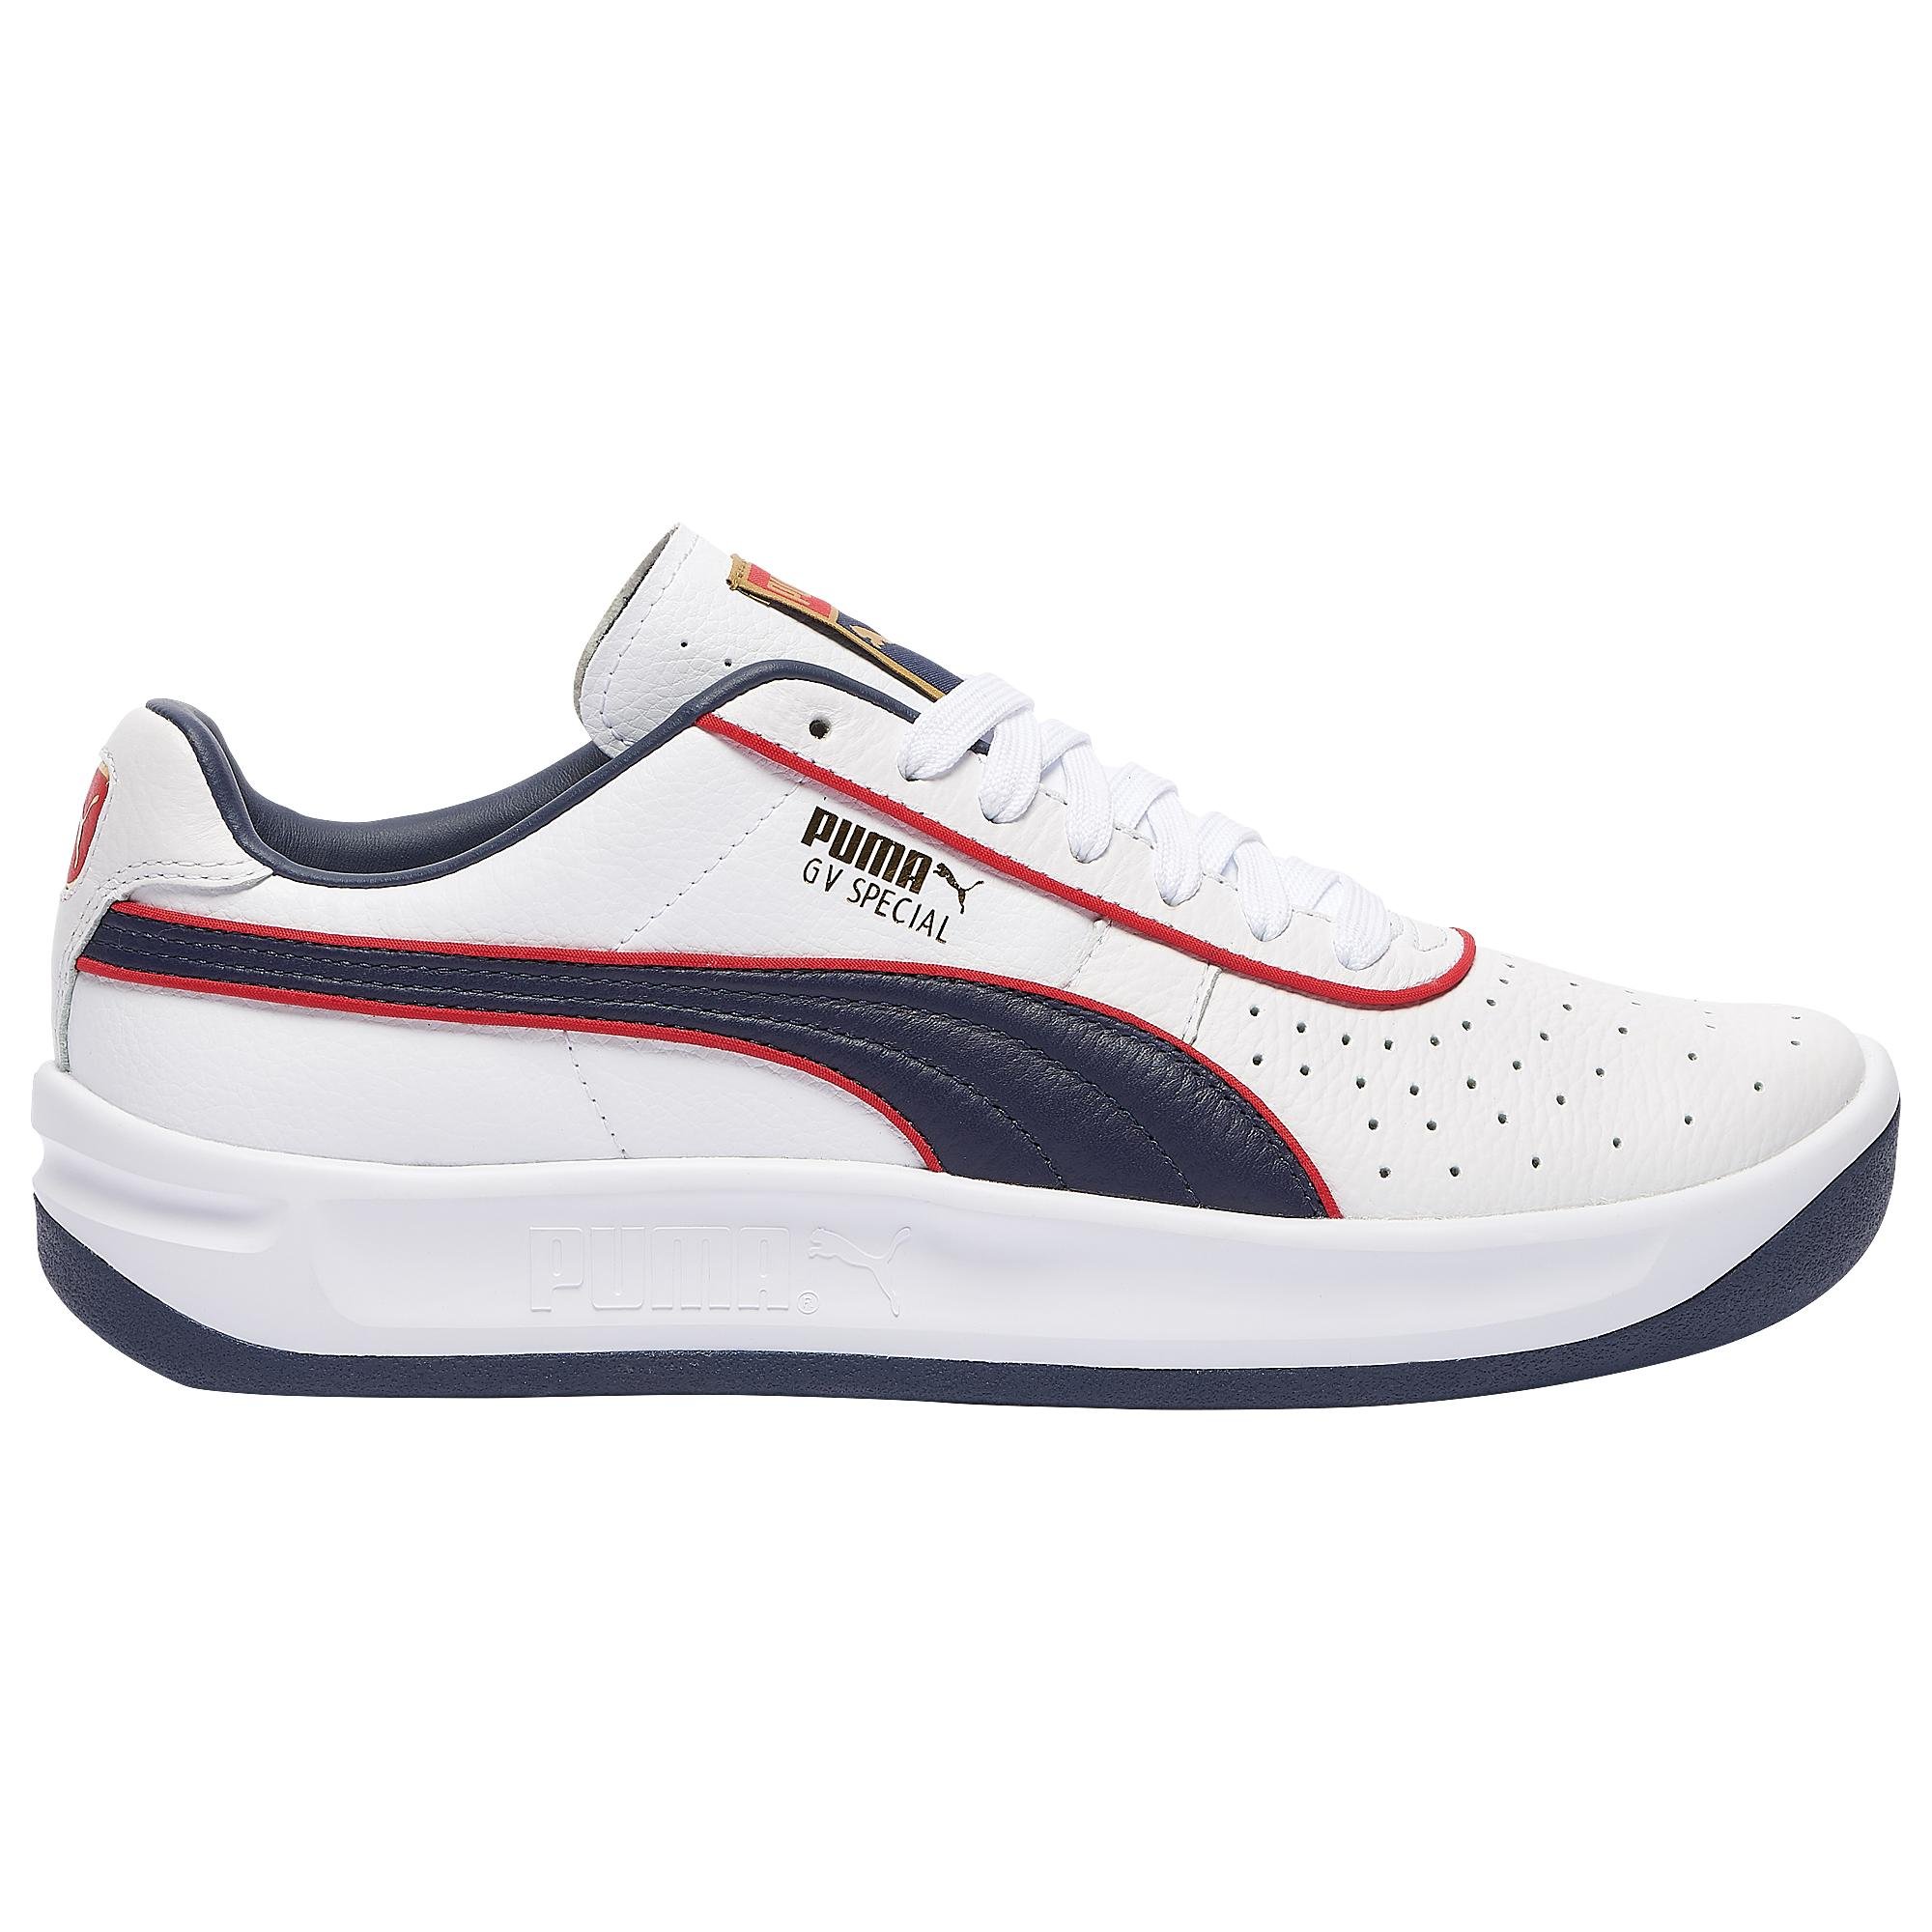 PUMA Leather Gv Special + Tennis Shoes 